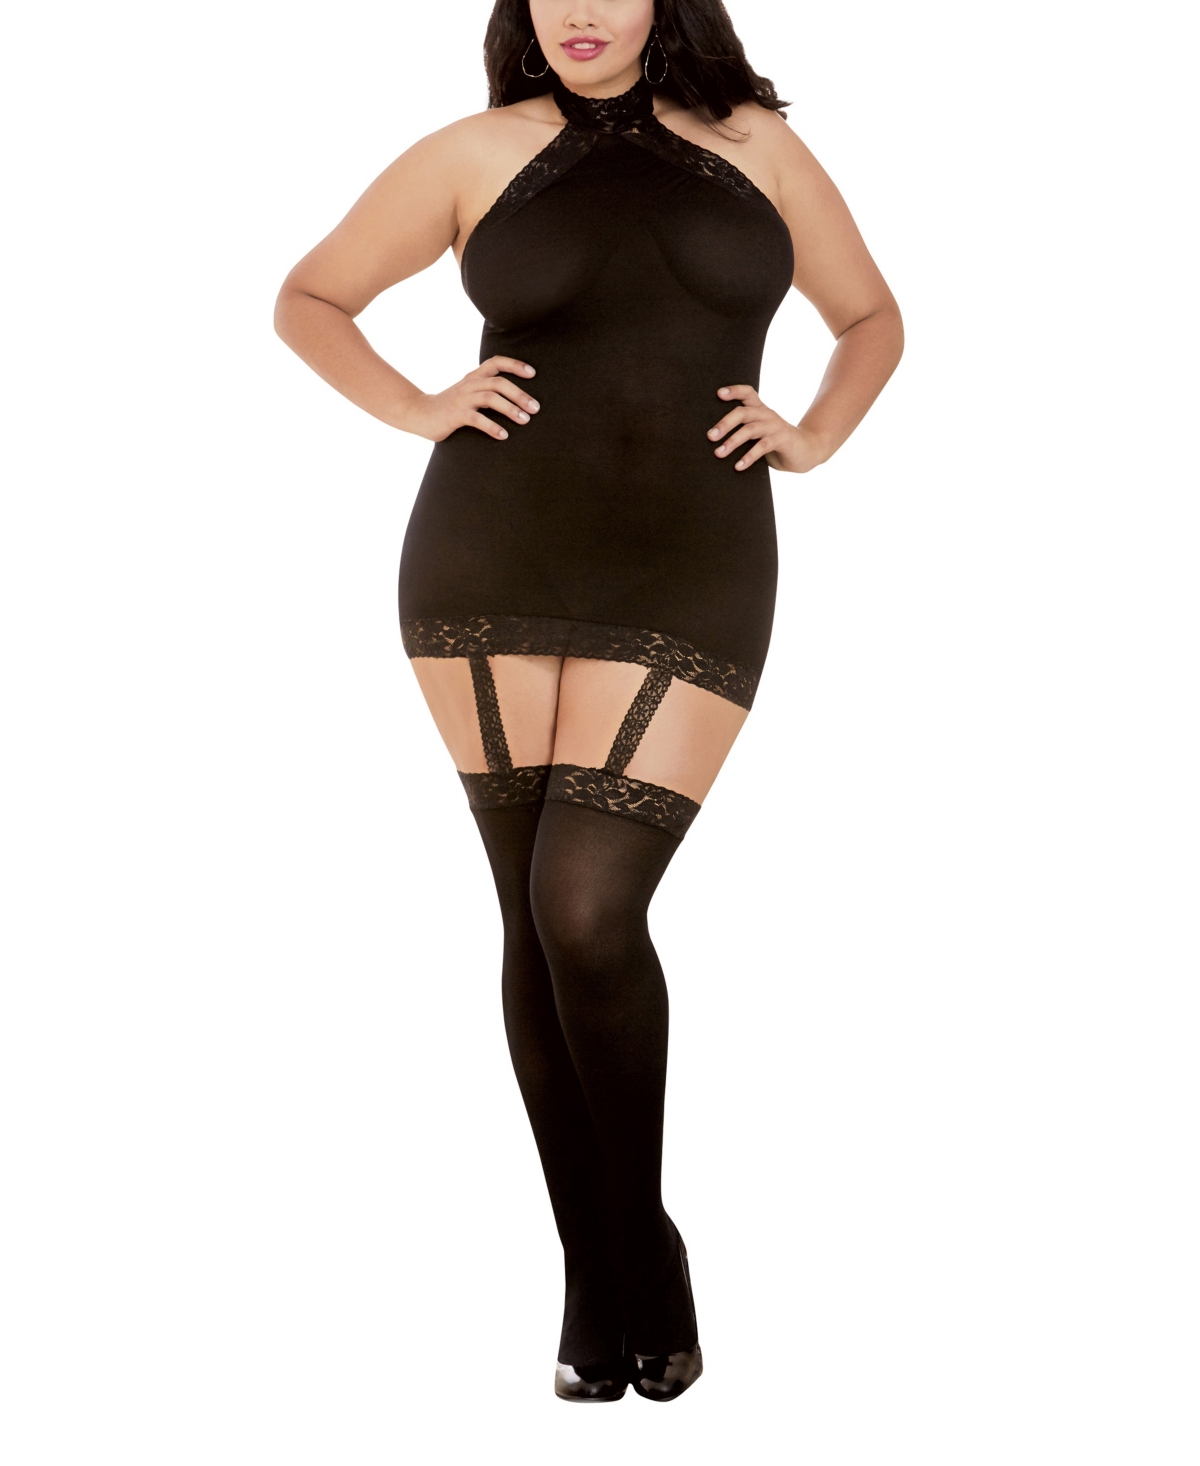 Dreamgirl Women S Plus Size Sheer Halter Garter Dress With Attached Garters And Stockings